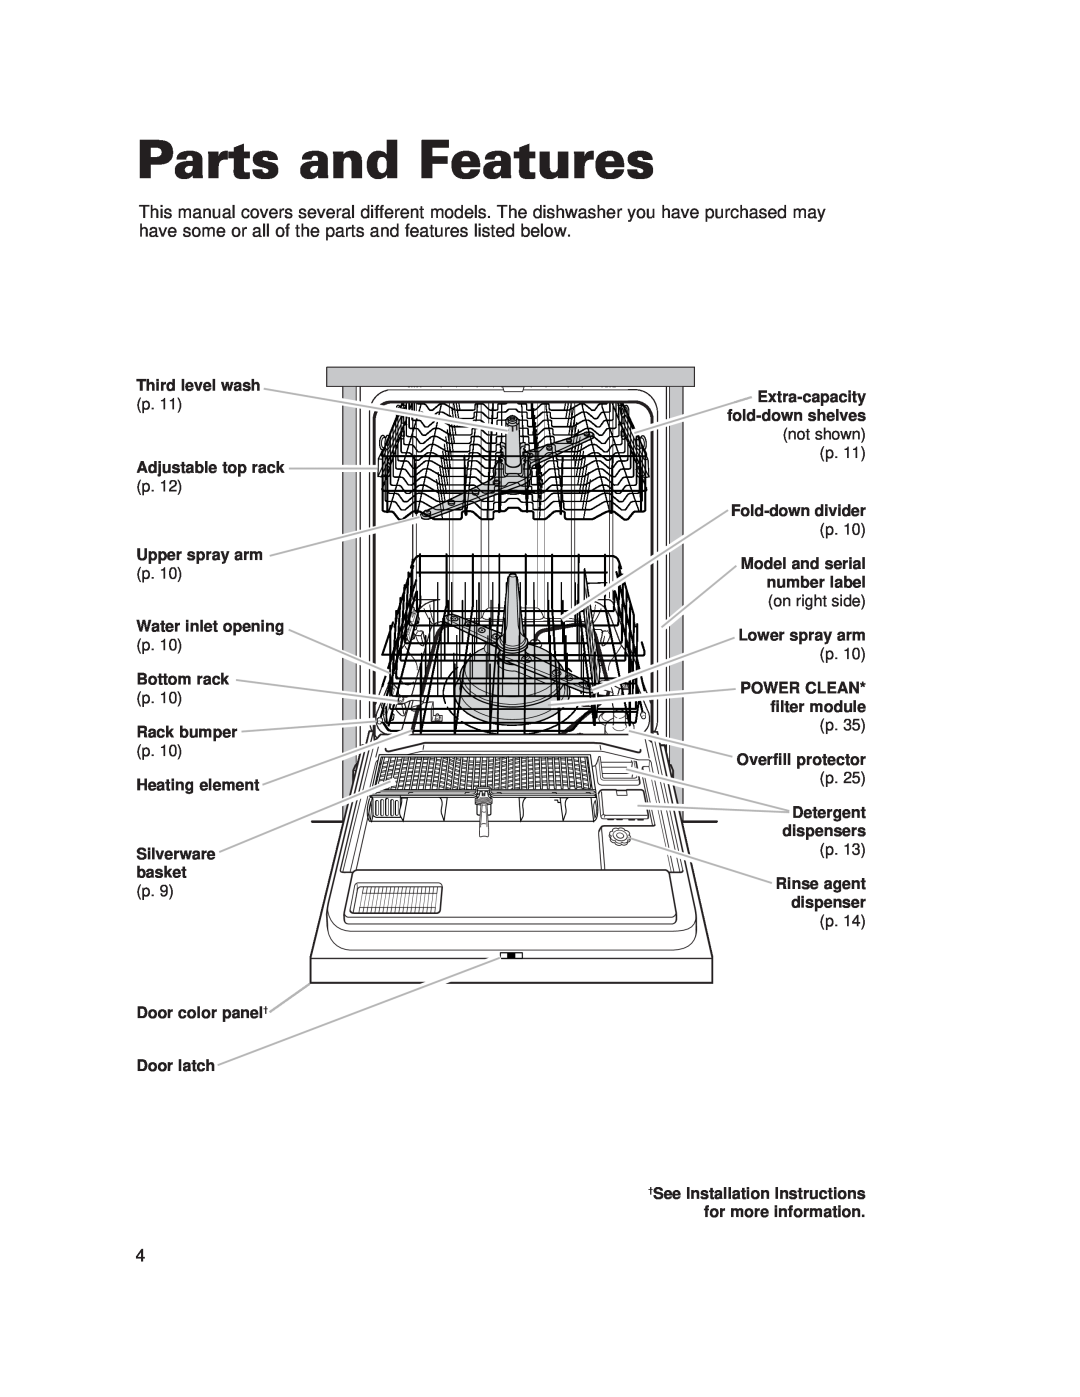 Whirlpool SERIES 920 Parts and Features, Third level wash, Extra-capacity, fold-down shelves, not shown, Fold-down divider 